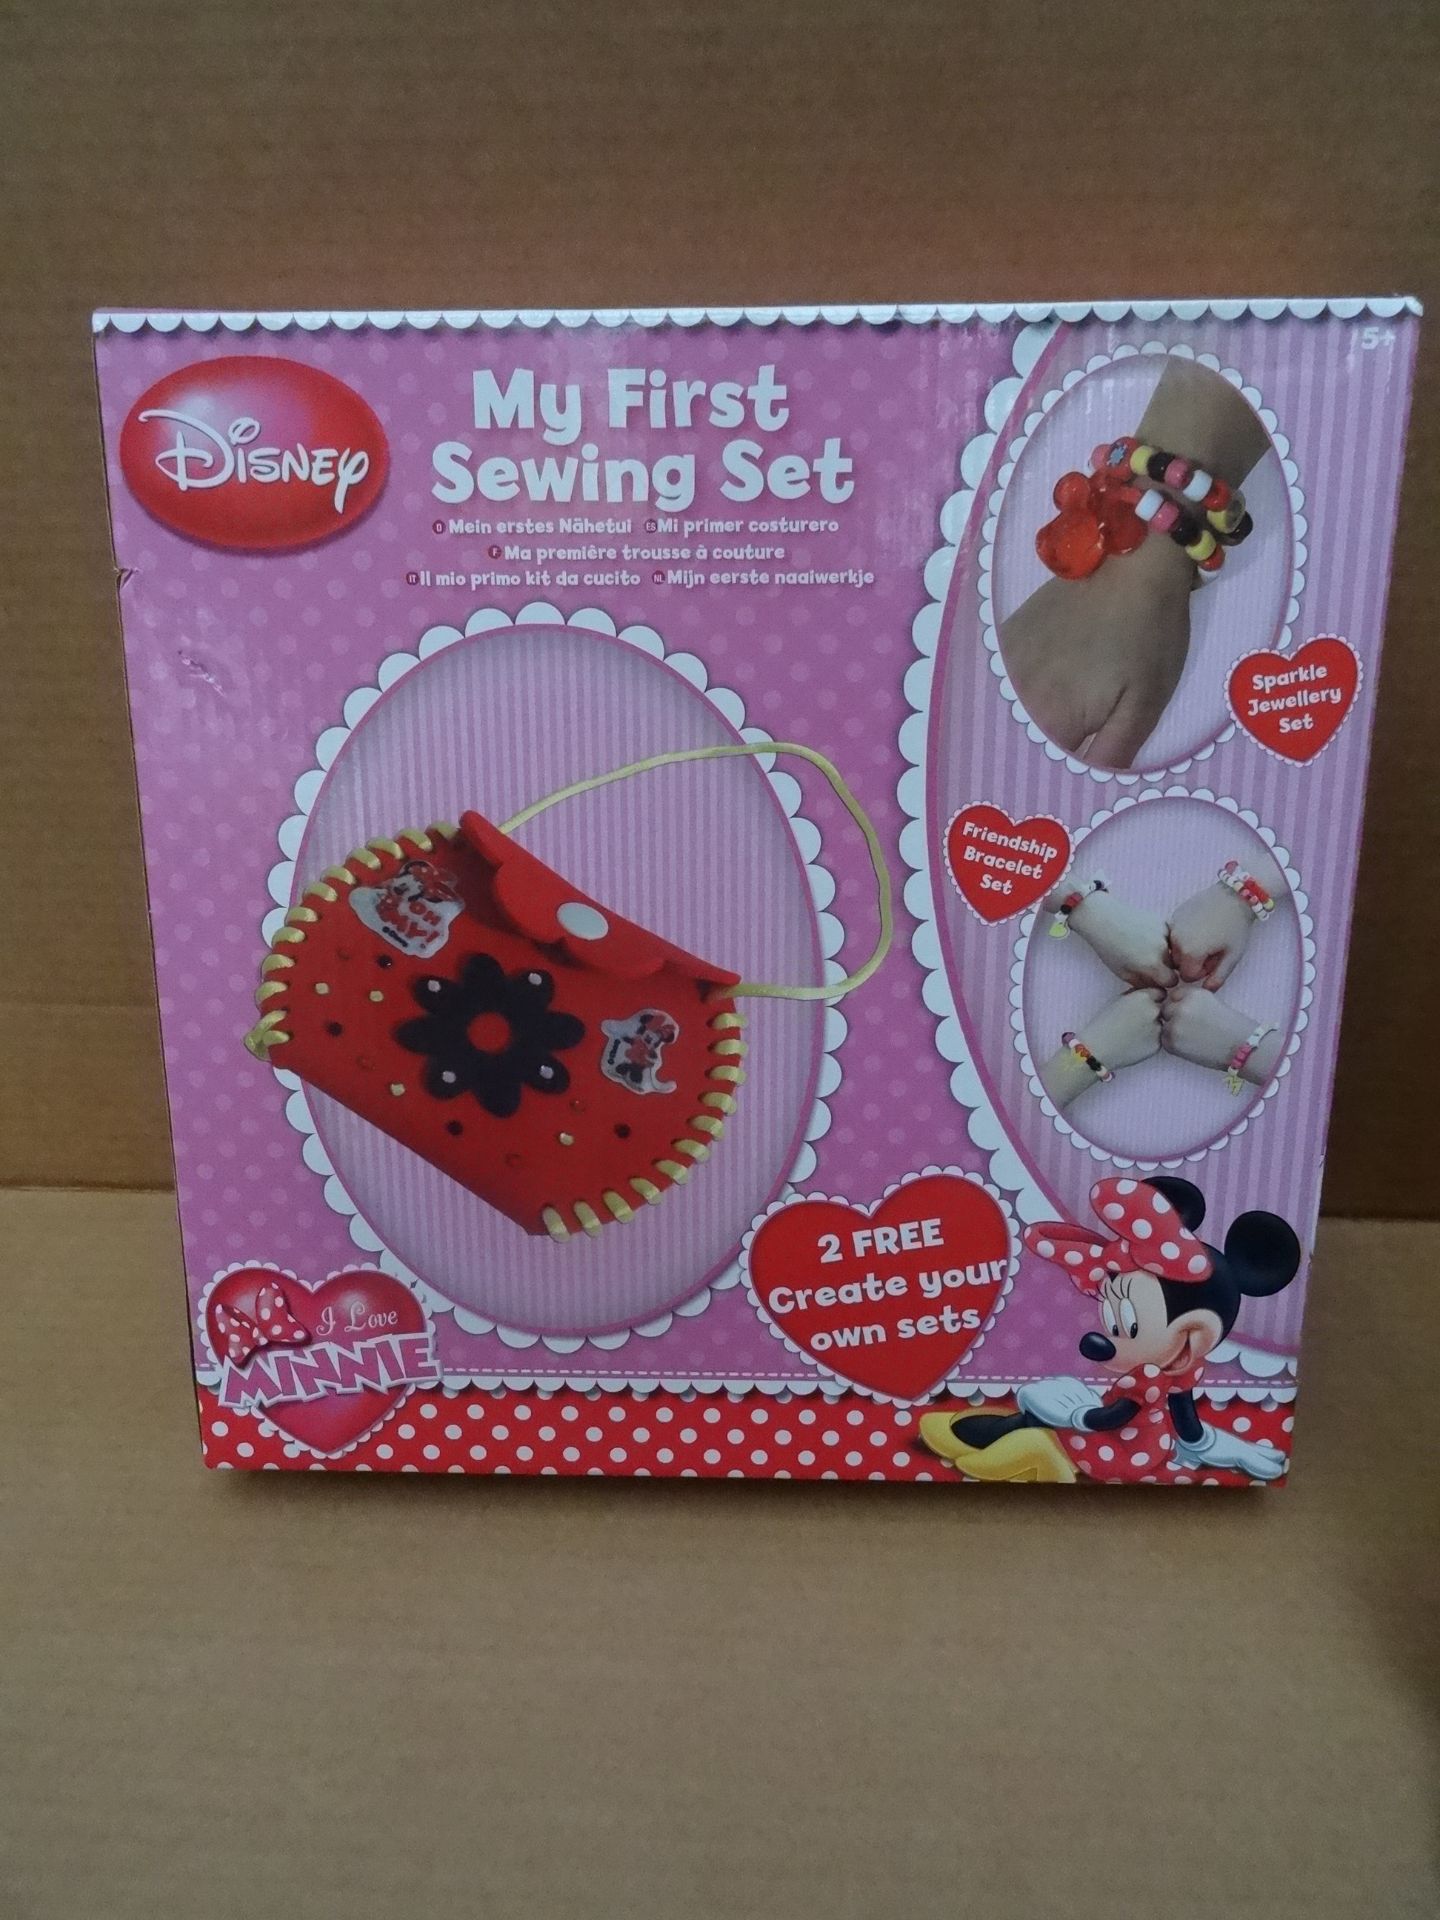 24 x Disney Minnie Mouse & Disney Princess 3 in 1 'My First Sewing Kit'. Includes: My First Sewing